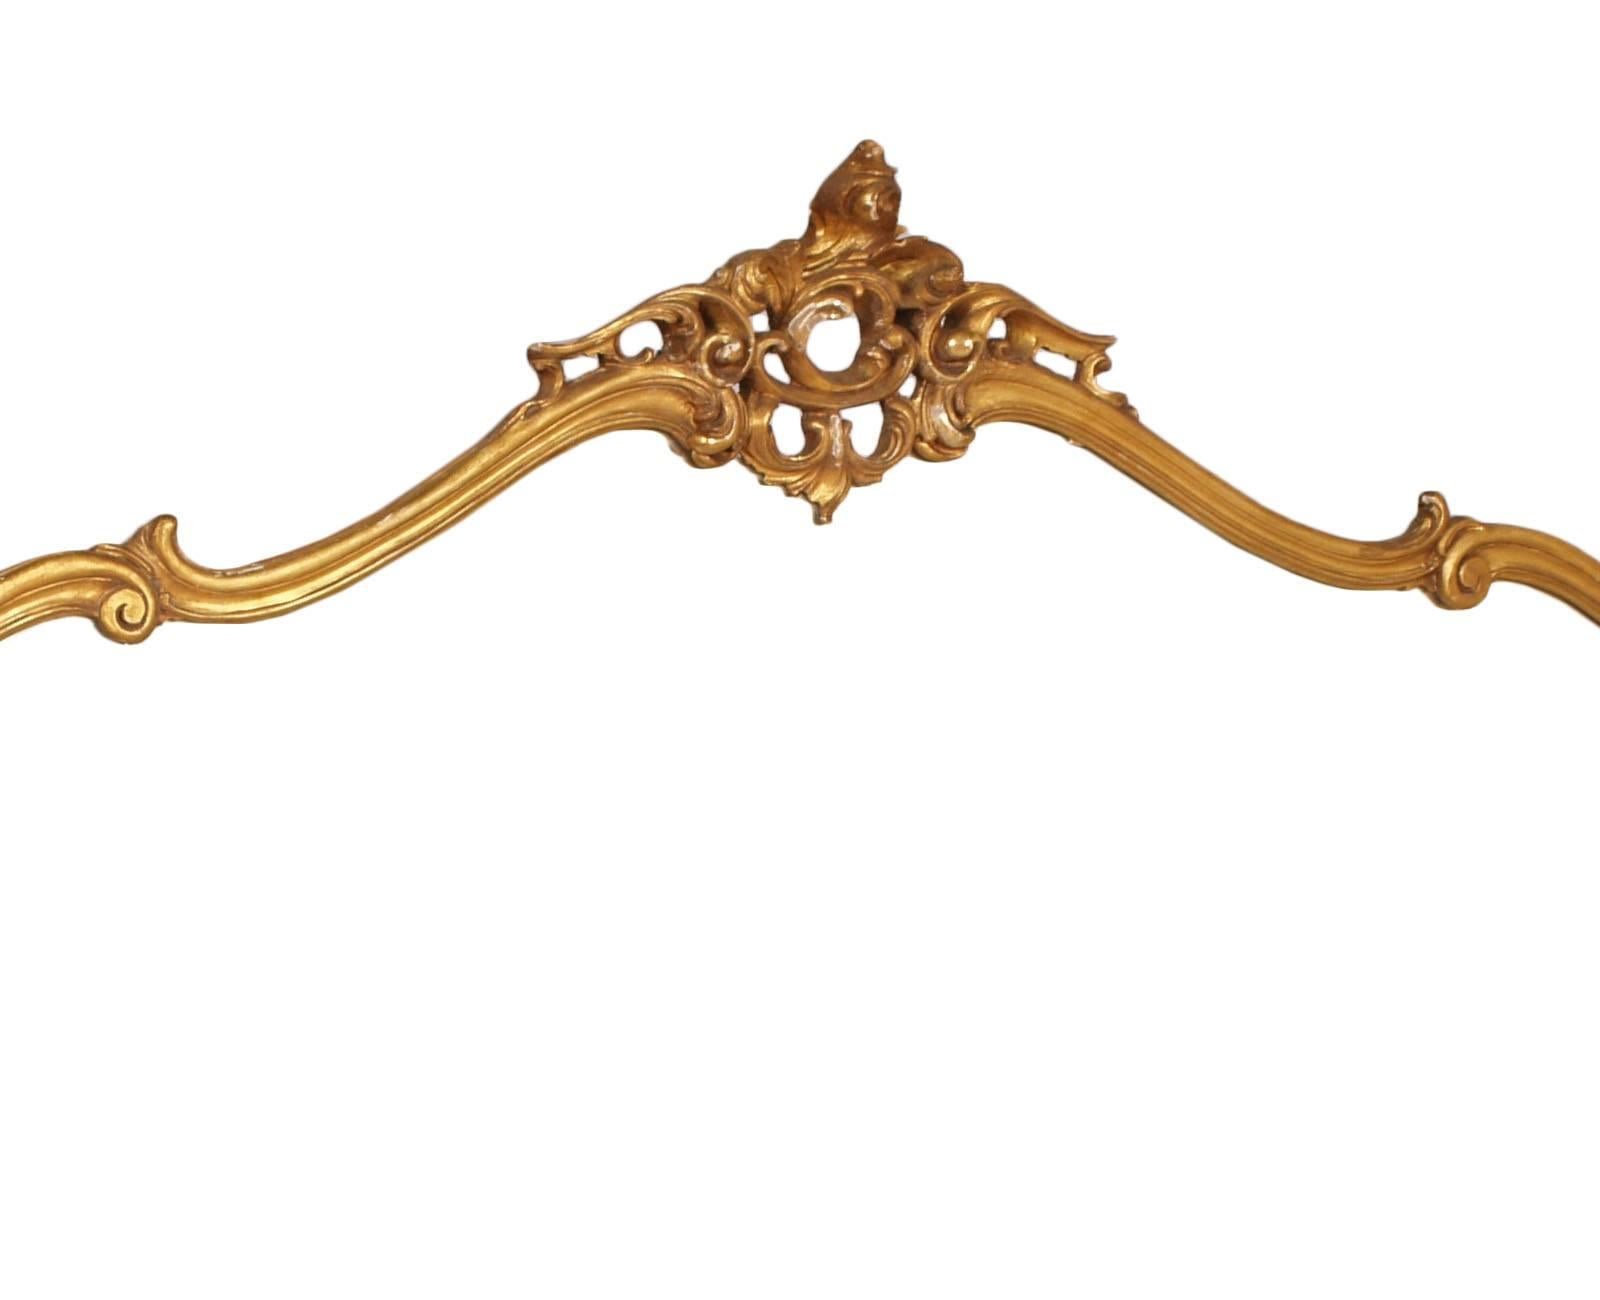 1900s Venetian large Baroque Chippendale wall mirror hand-carved gilt walnut gold leaf

Measure cm: H 116, W 210, D 10.